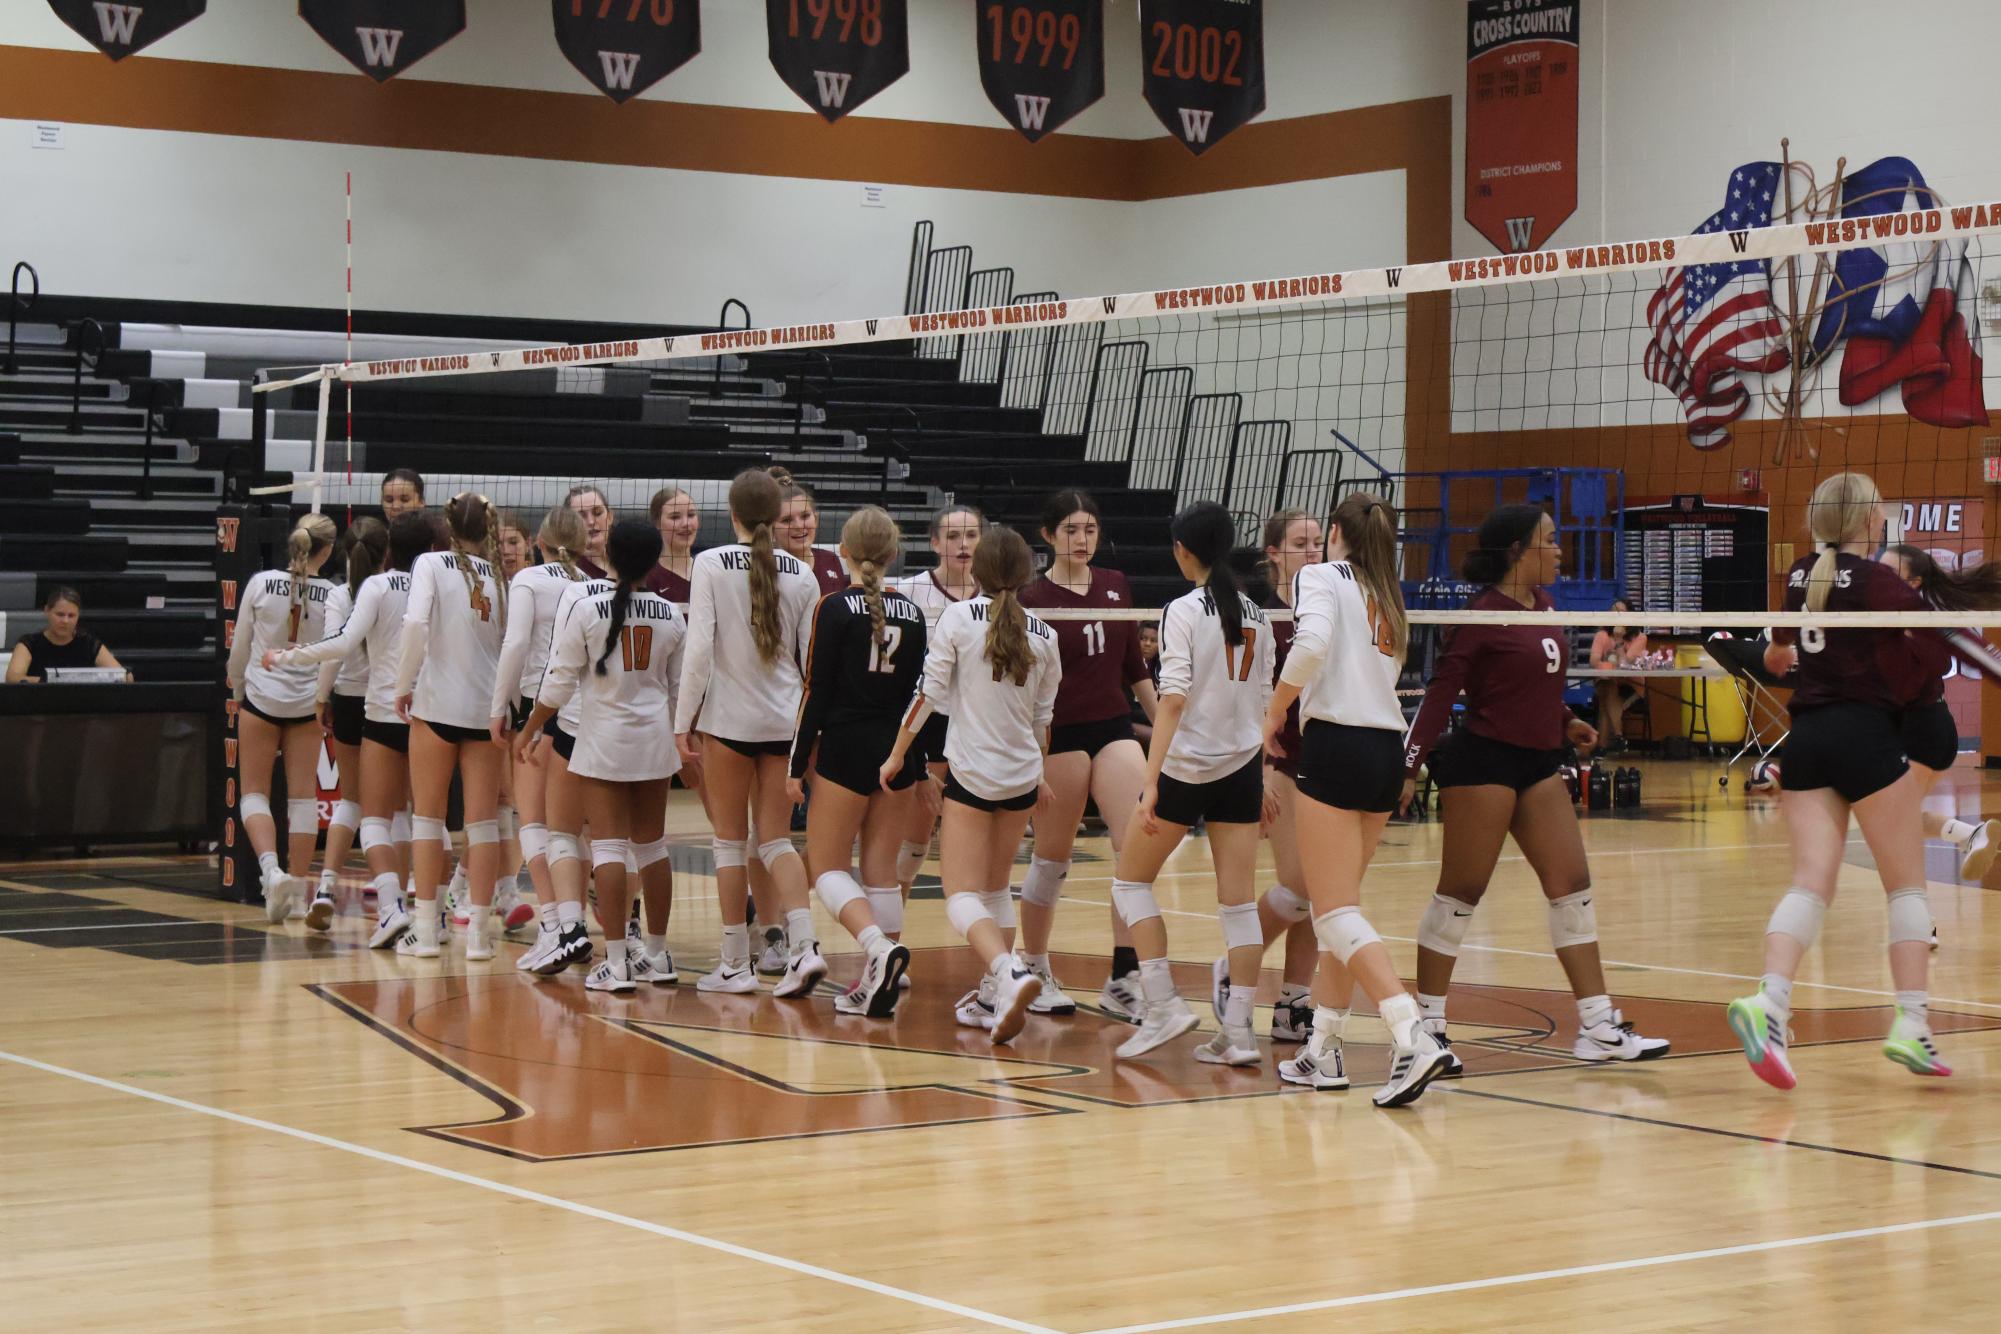 JV+Orange+Volleyball+Faces+Setback+After+Losing+to+the+Dragons+2-0